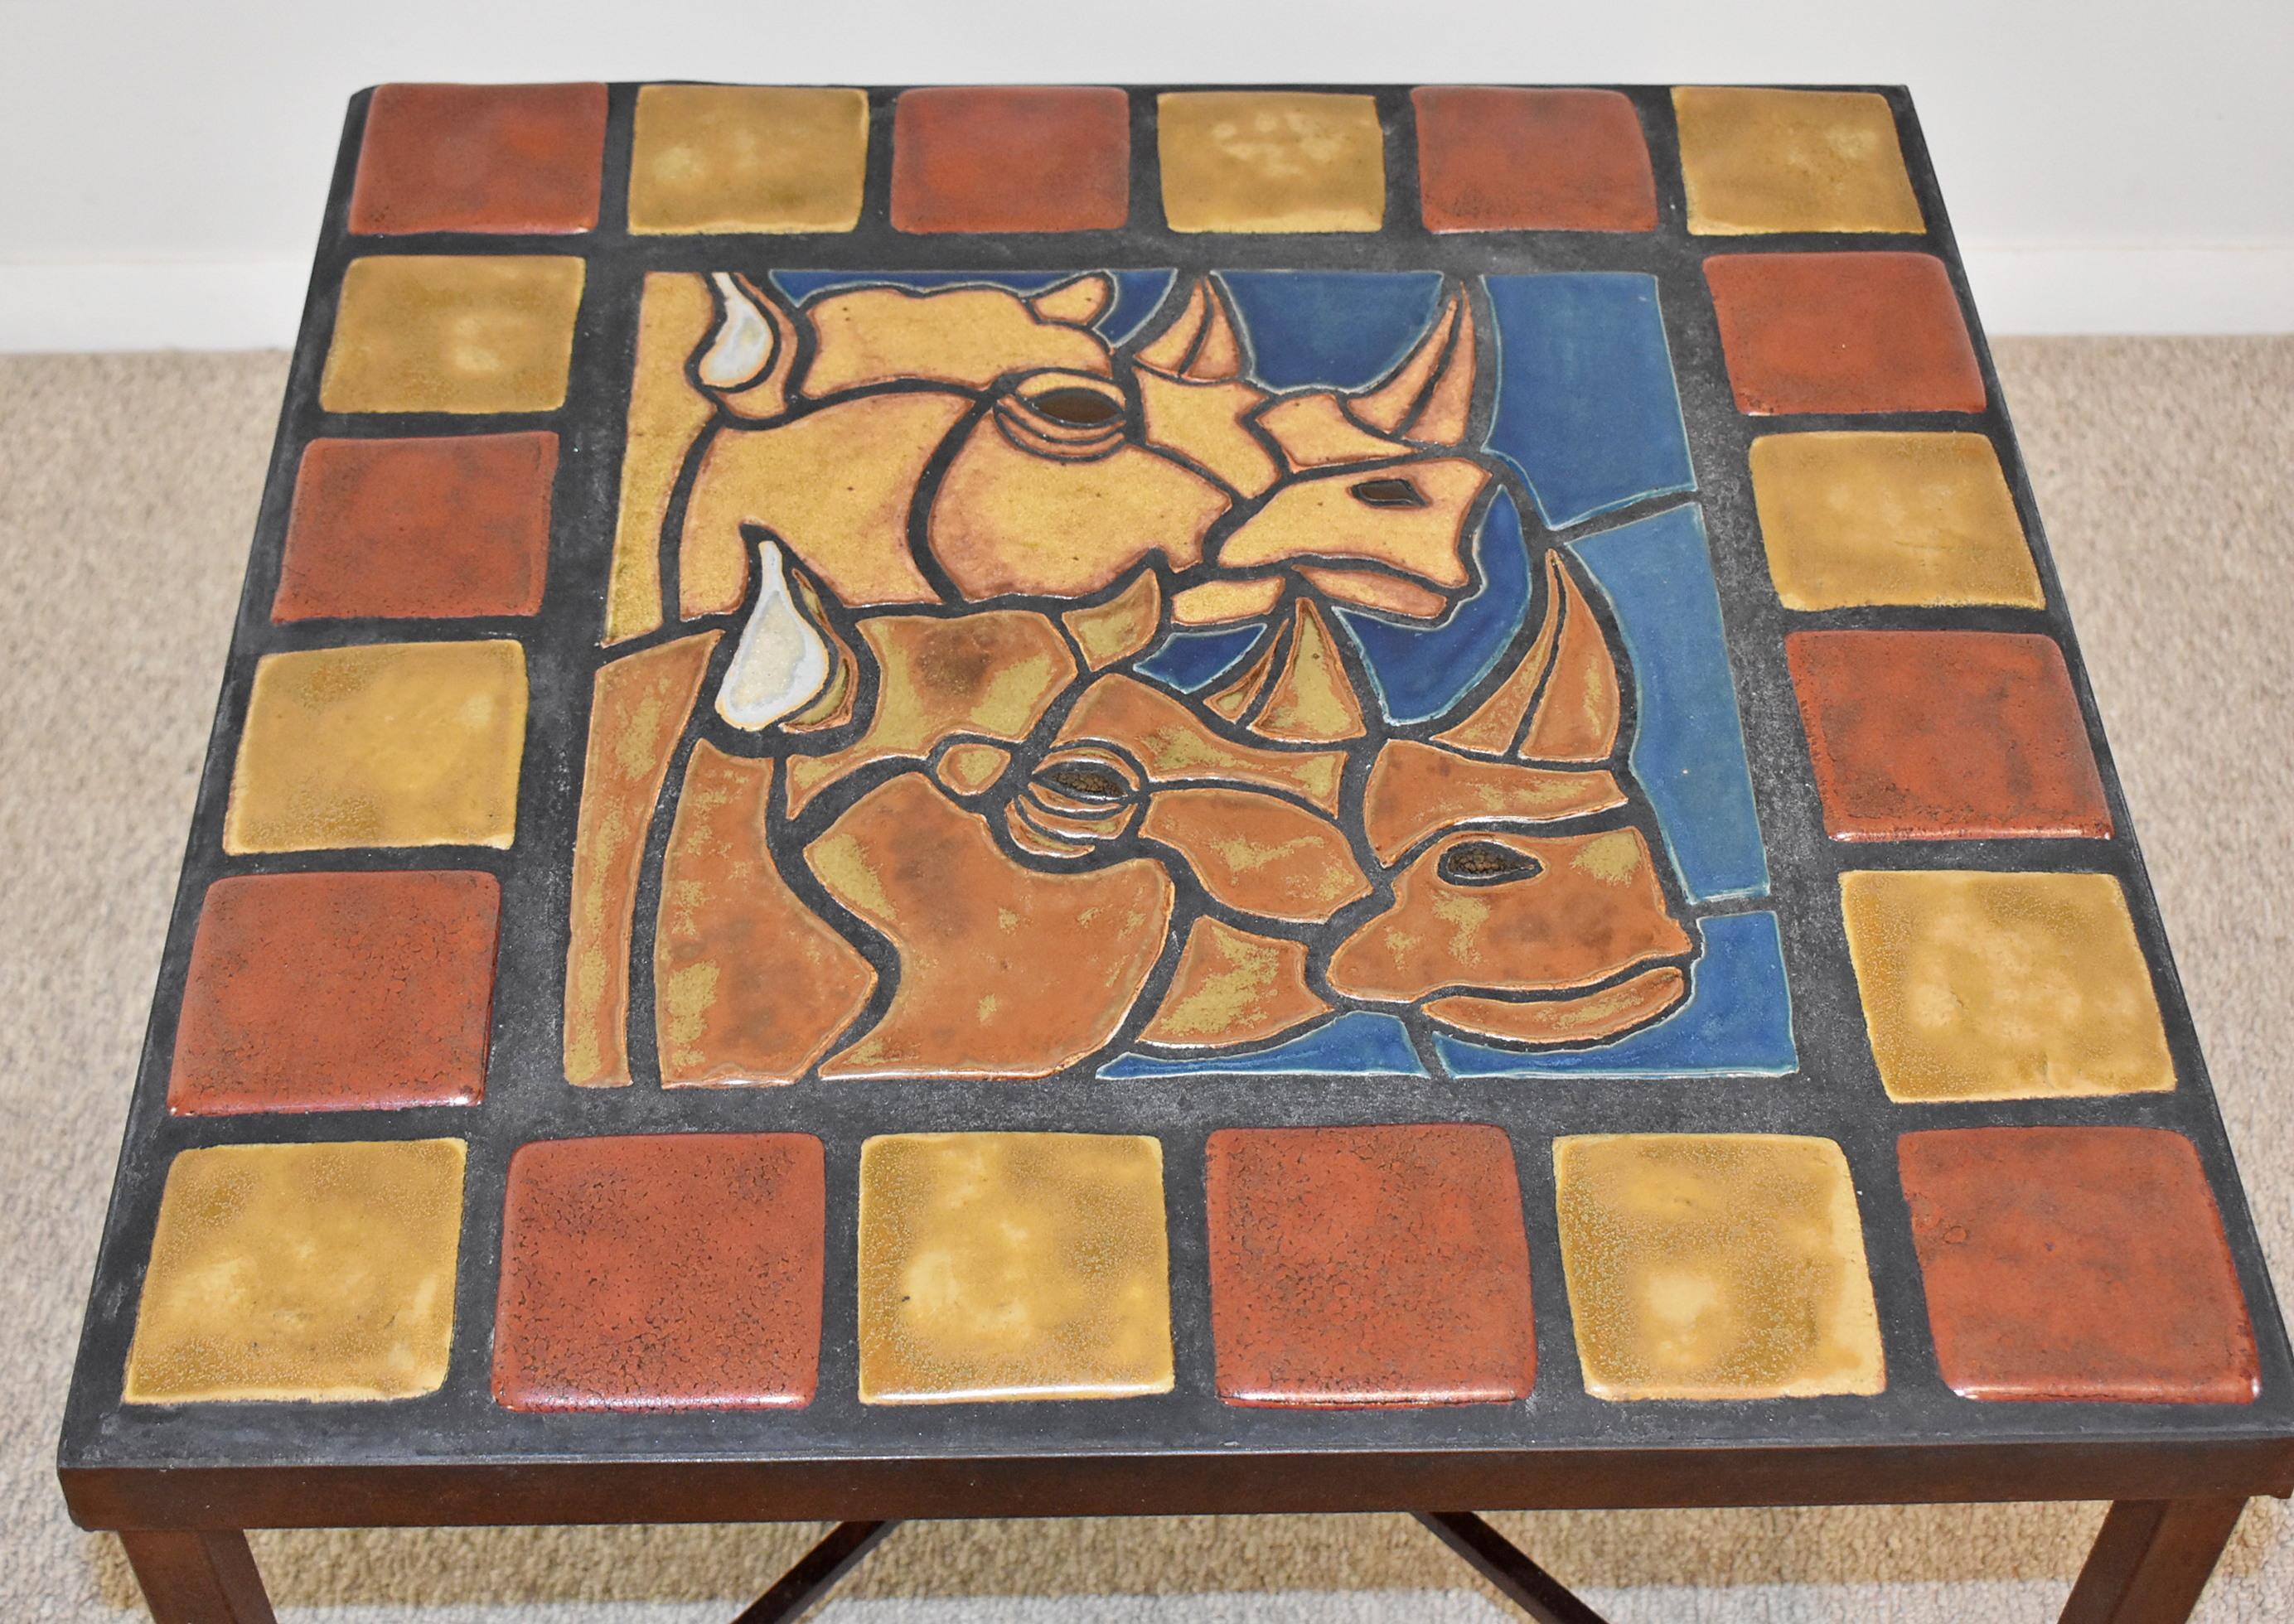 Pewabic Tile Top Table. Rhinos inlaid tile top design with wrought iron frame. Rhinoceros heads with alternating square border tiles. Authenticated by Pewabic Pottery, Detroit, MI with paperwork attached to photos. Great condition consistent with